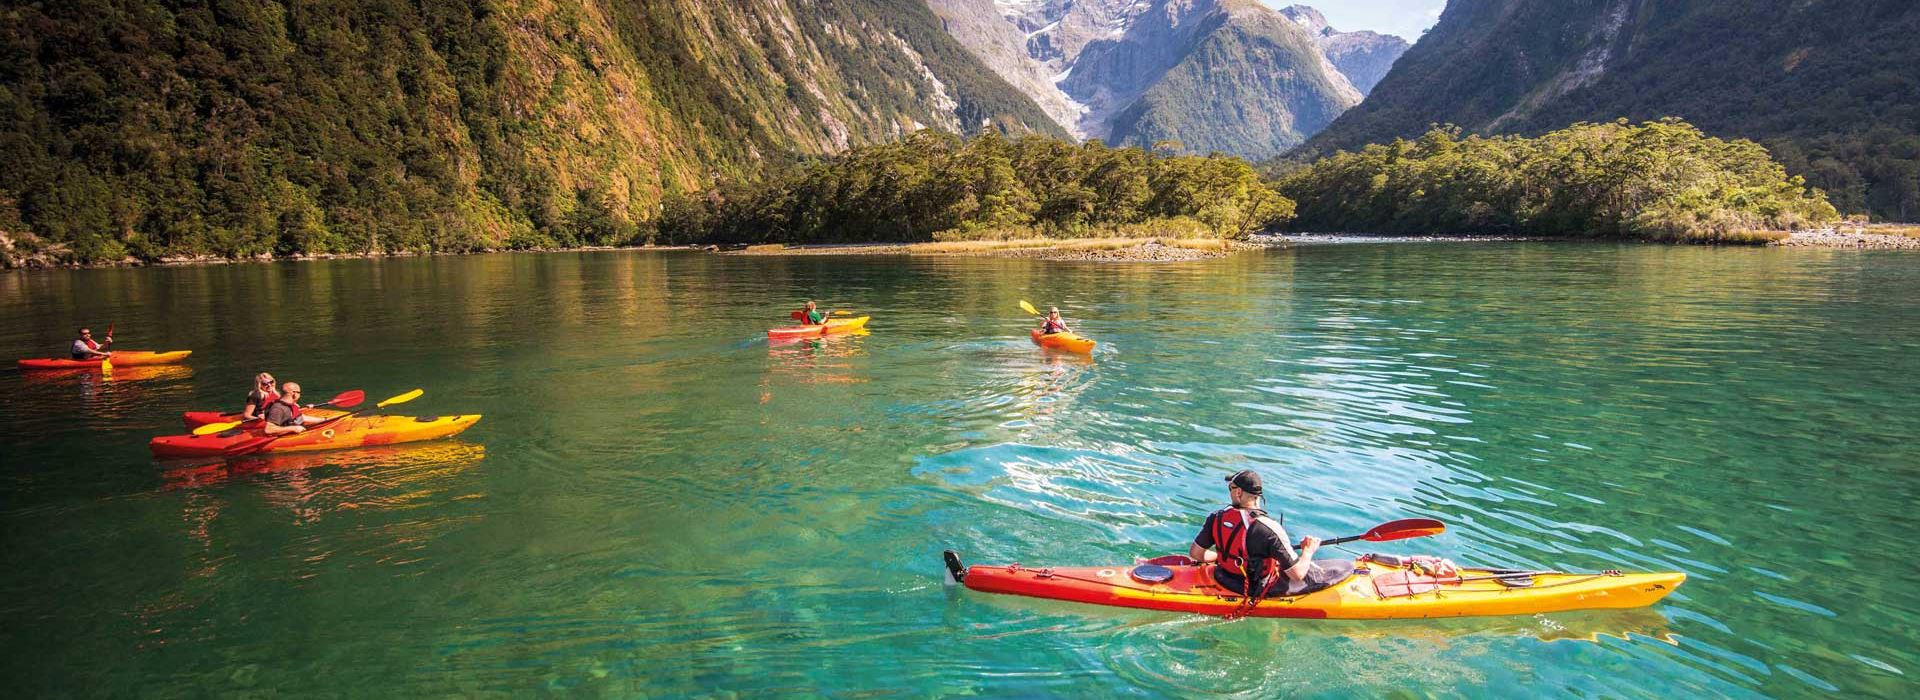 12 Day - Family Adventure Tour- South Island